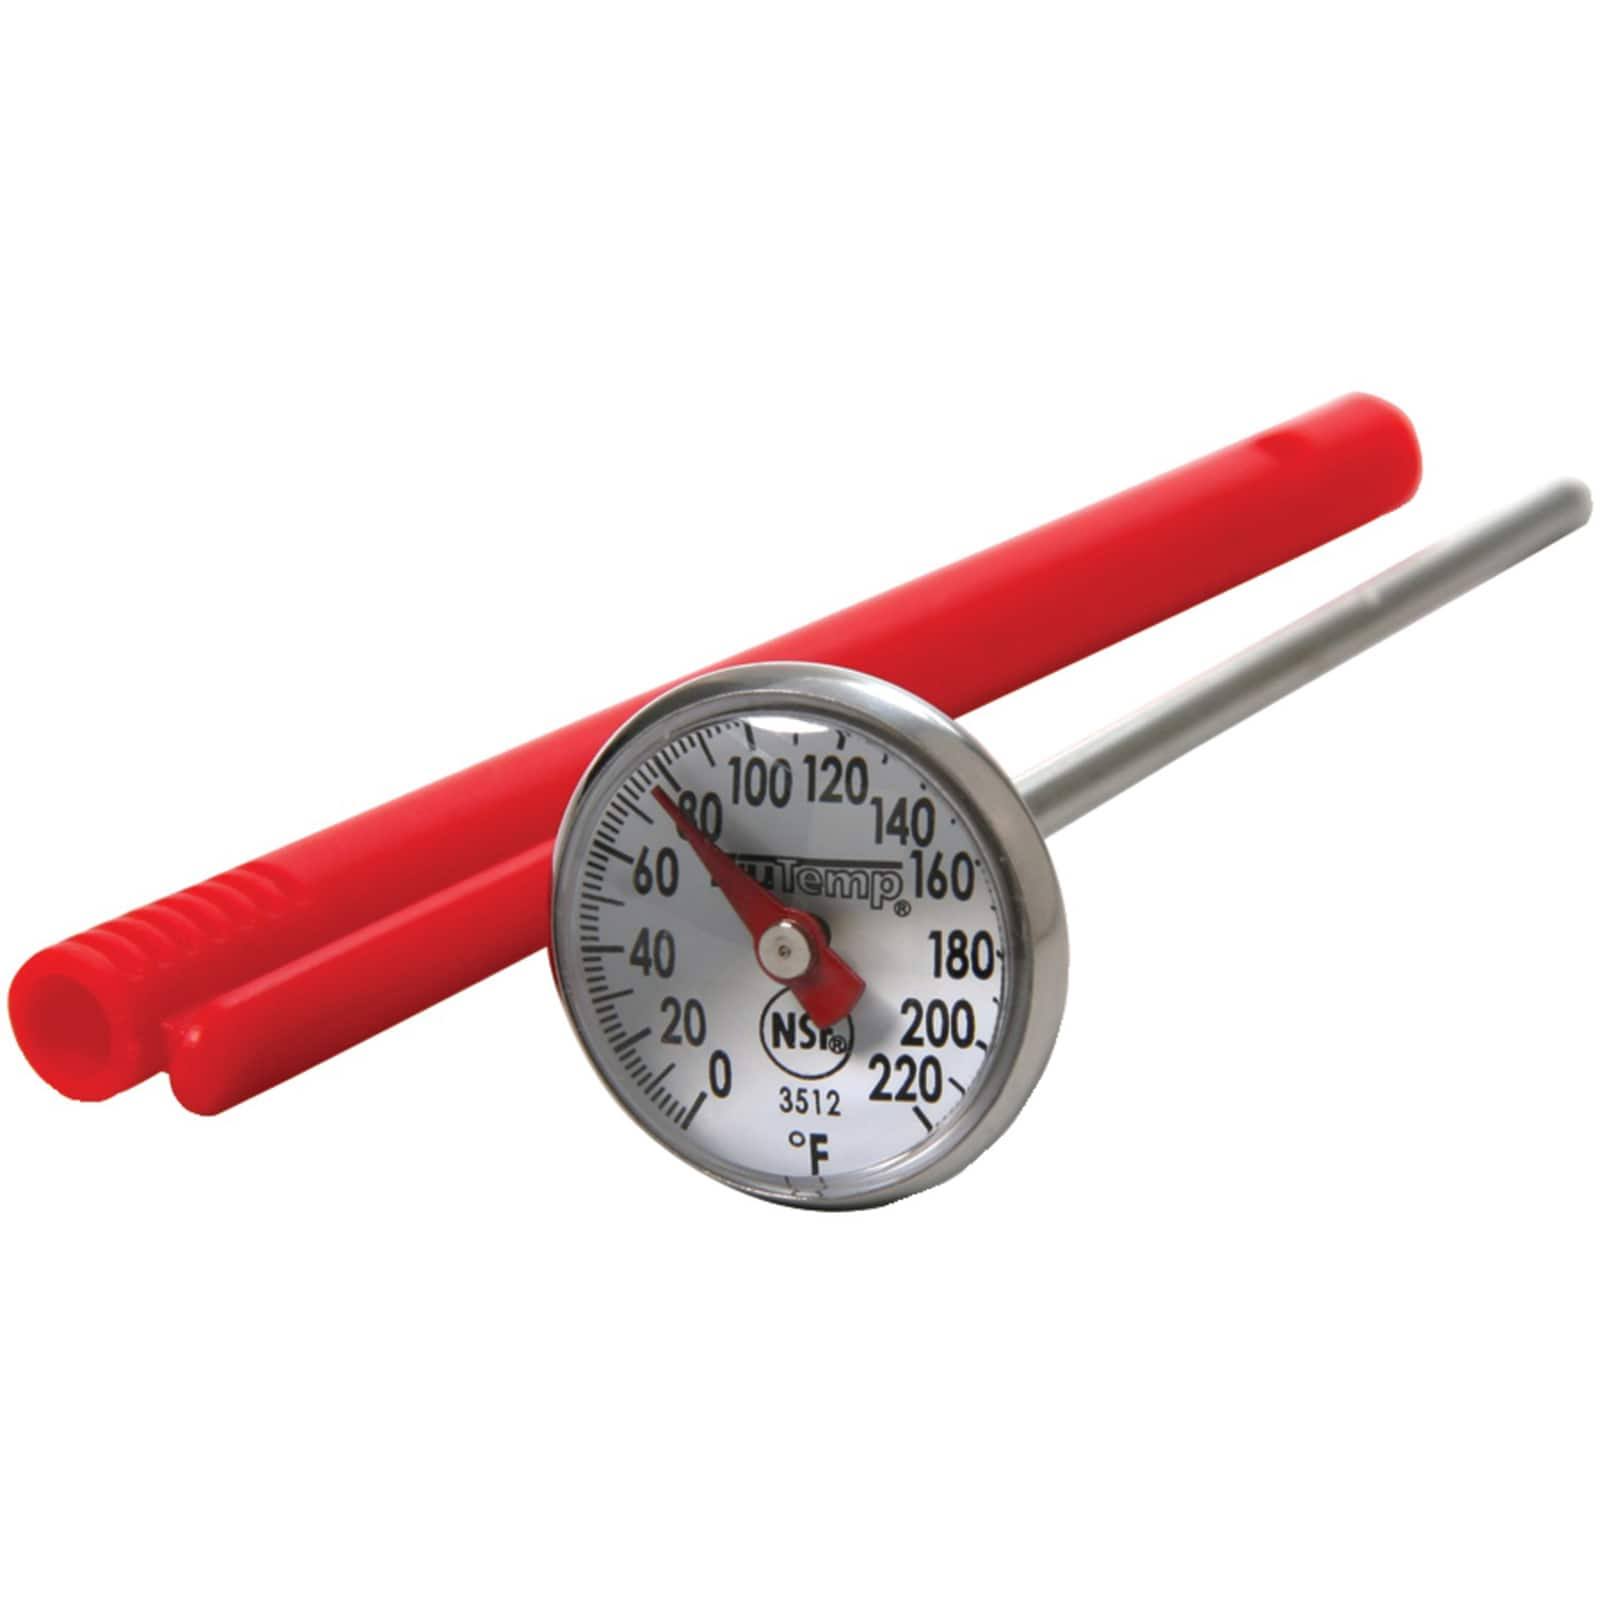 Taylor 3512 Precision Instant Read Cooking Thermometer - 1" Dial